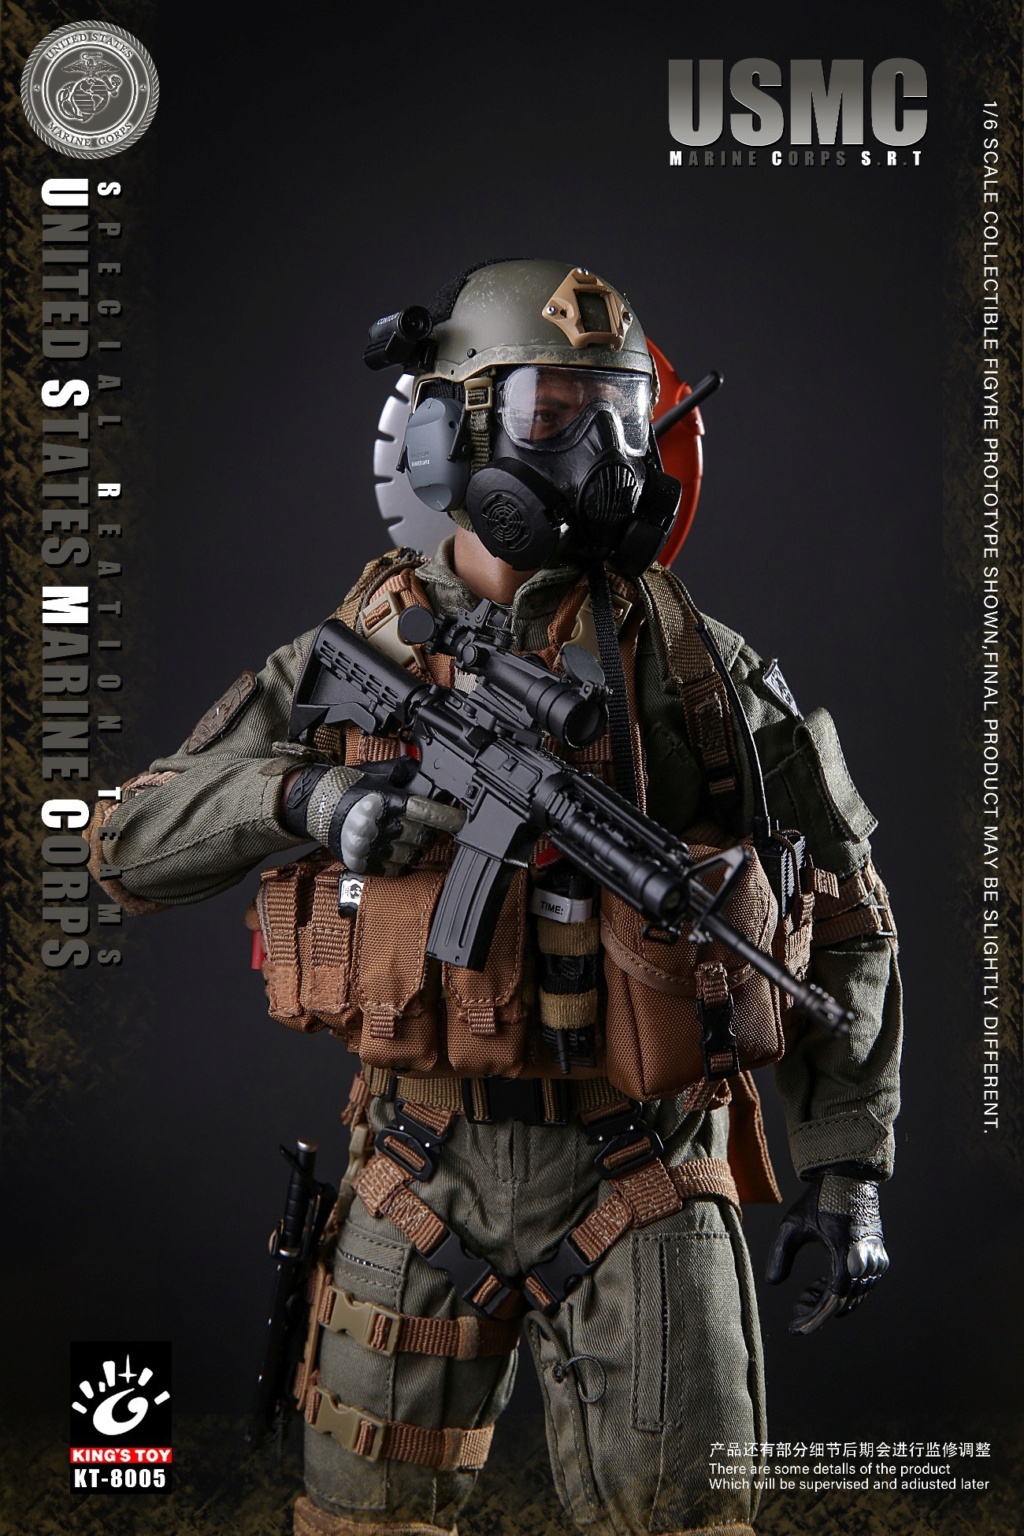 NEW PRODUCT: King's Toy: 1/6 USMC SRT US Marine Corps Special Response Team (#KT-8005) 09515911